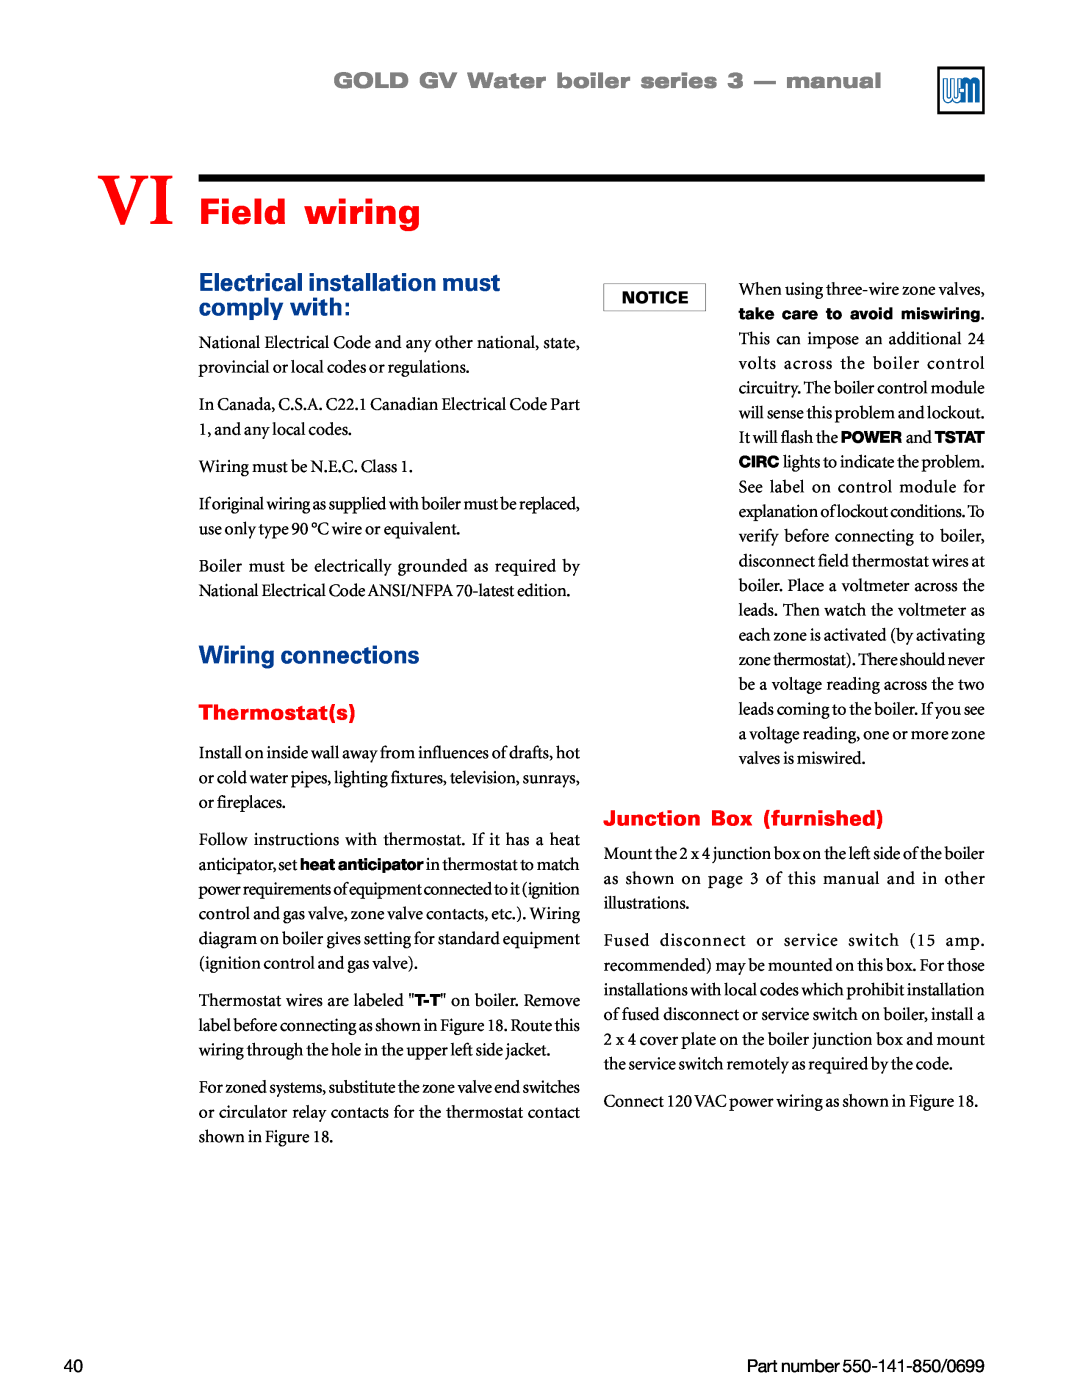 Weil-McLain GOLD DV WATER BOILER manual VI Field wiring, Electrical installation must comply with, Wiring connections 